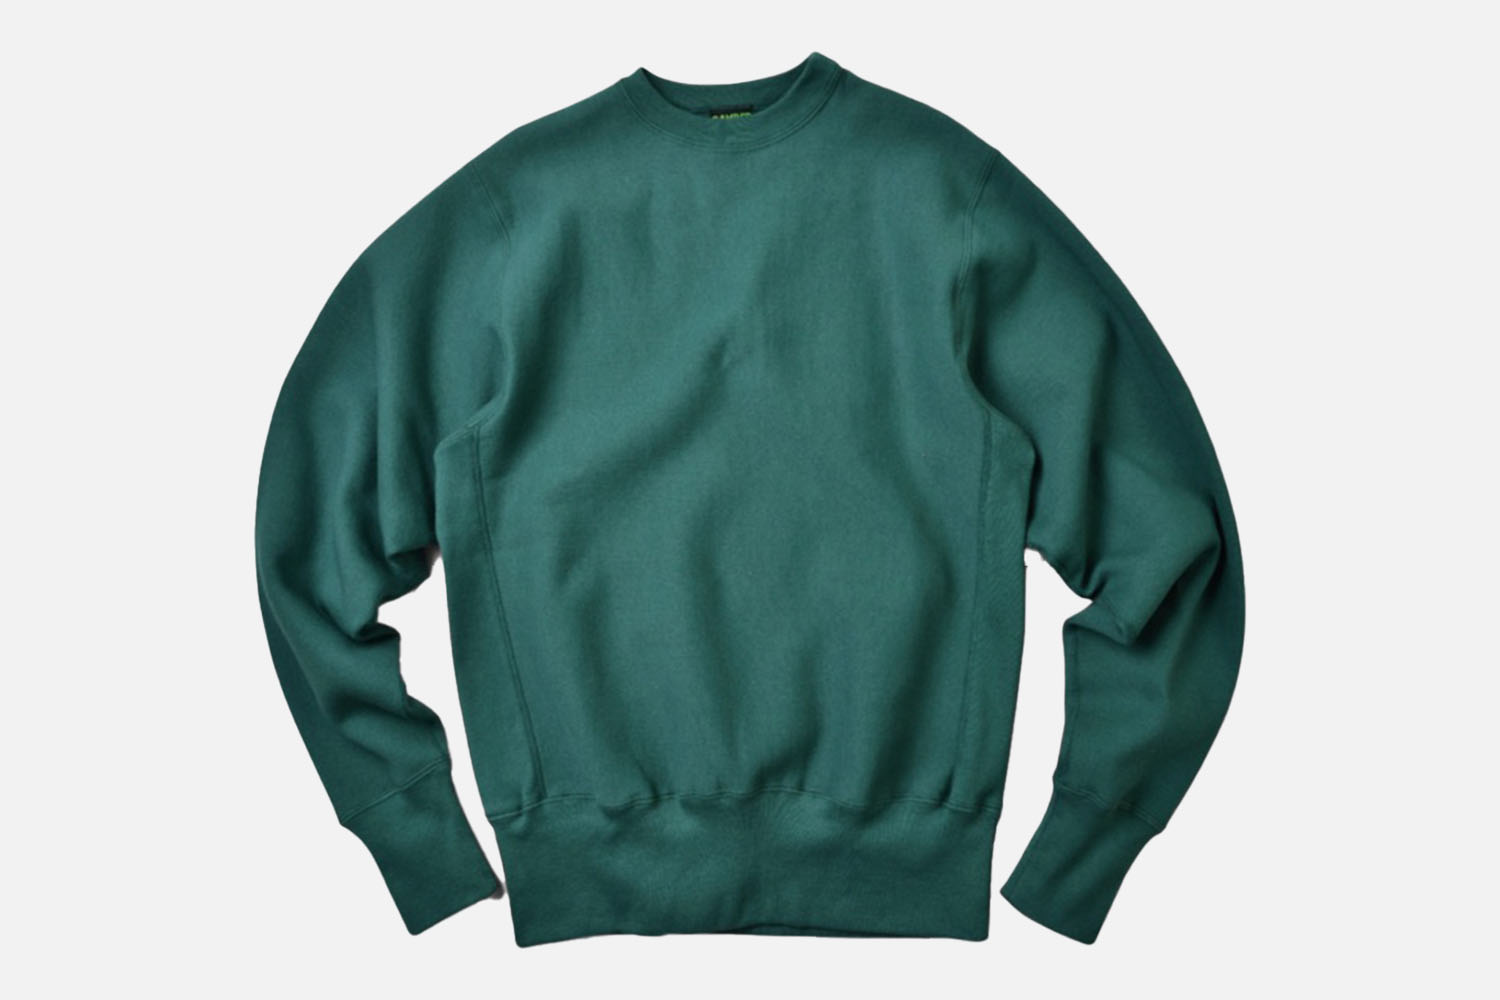 The All-American Action: Camber 234 Cross-Knit Heavyweight Crew Neck Sweatshirt